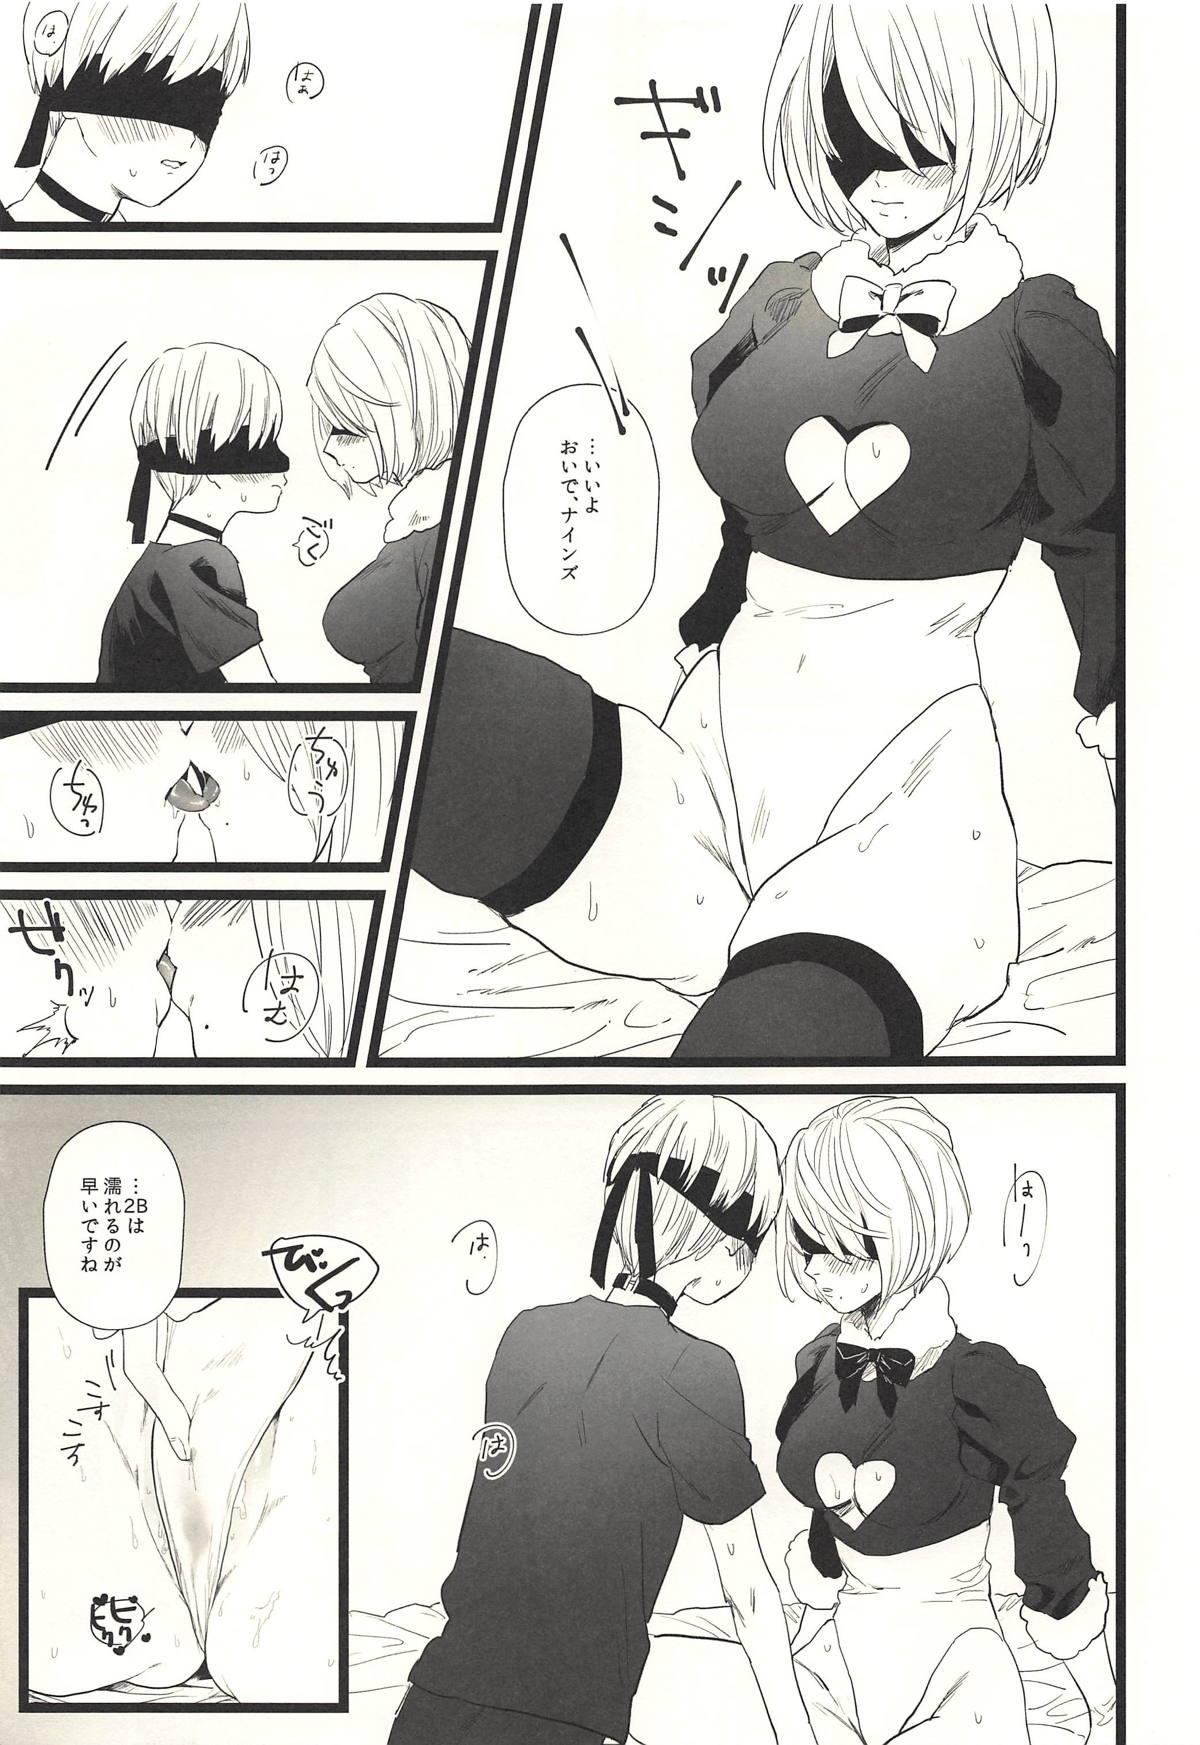 Sucking Dick ONE MORE TIME - Nier automata Boots - Page 8